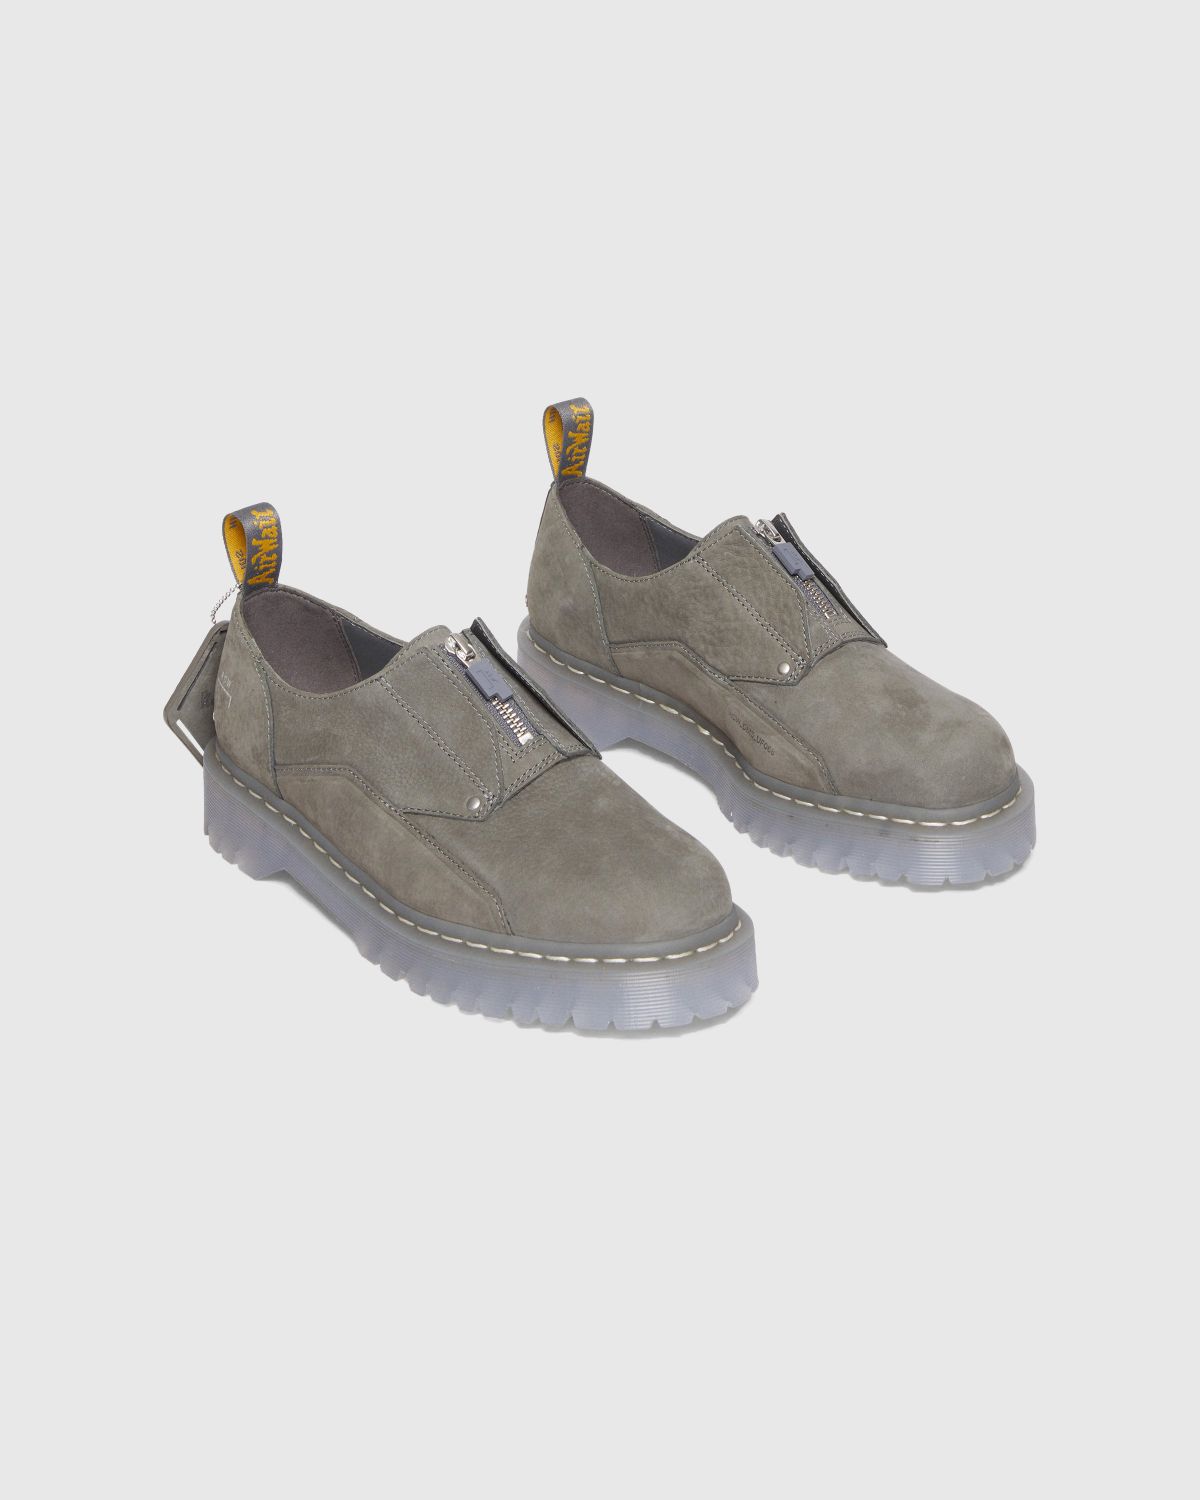 A-Cold-Wall* x Dr. Martens – 1461 BEX Low Mid Grey - Shoes - Grey - Image 3